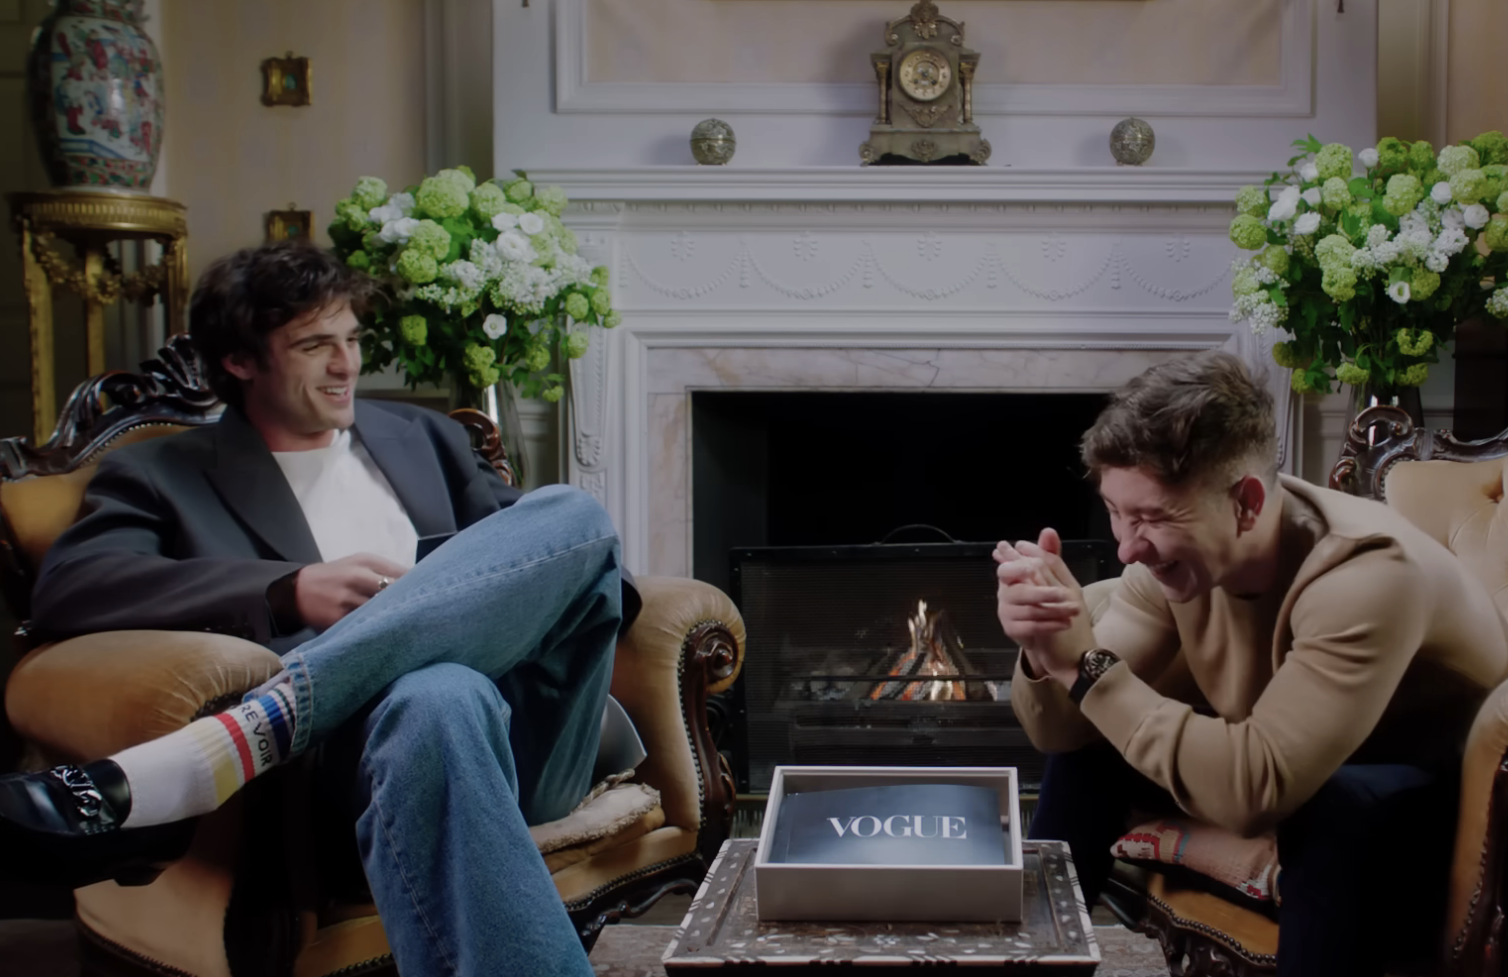 Jacob and Barry sitting and laughing together in front of a fireplace